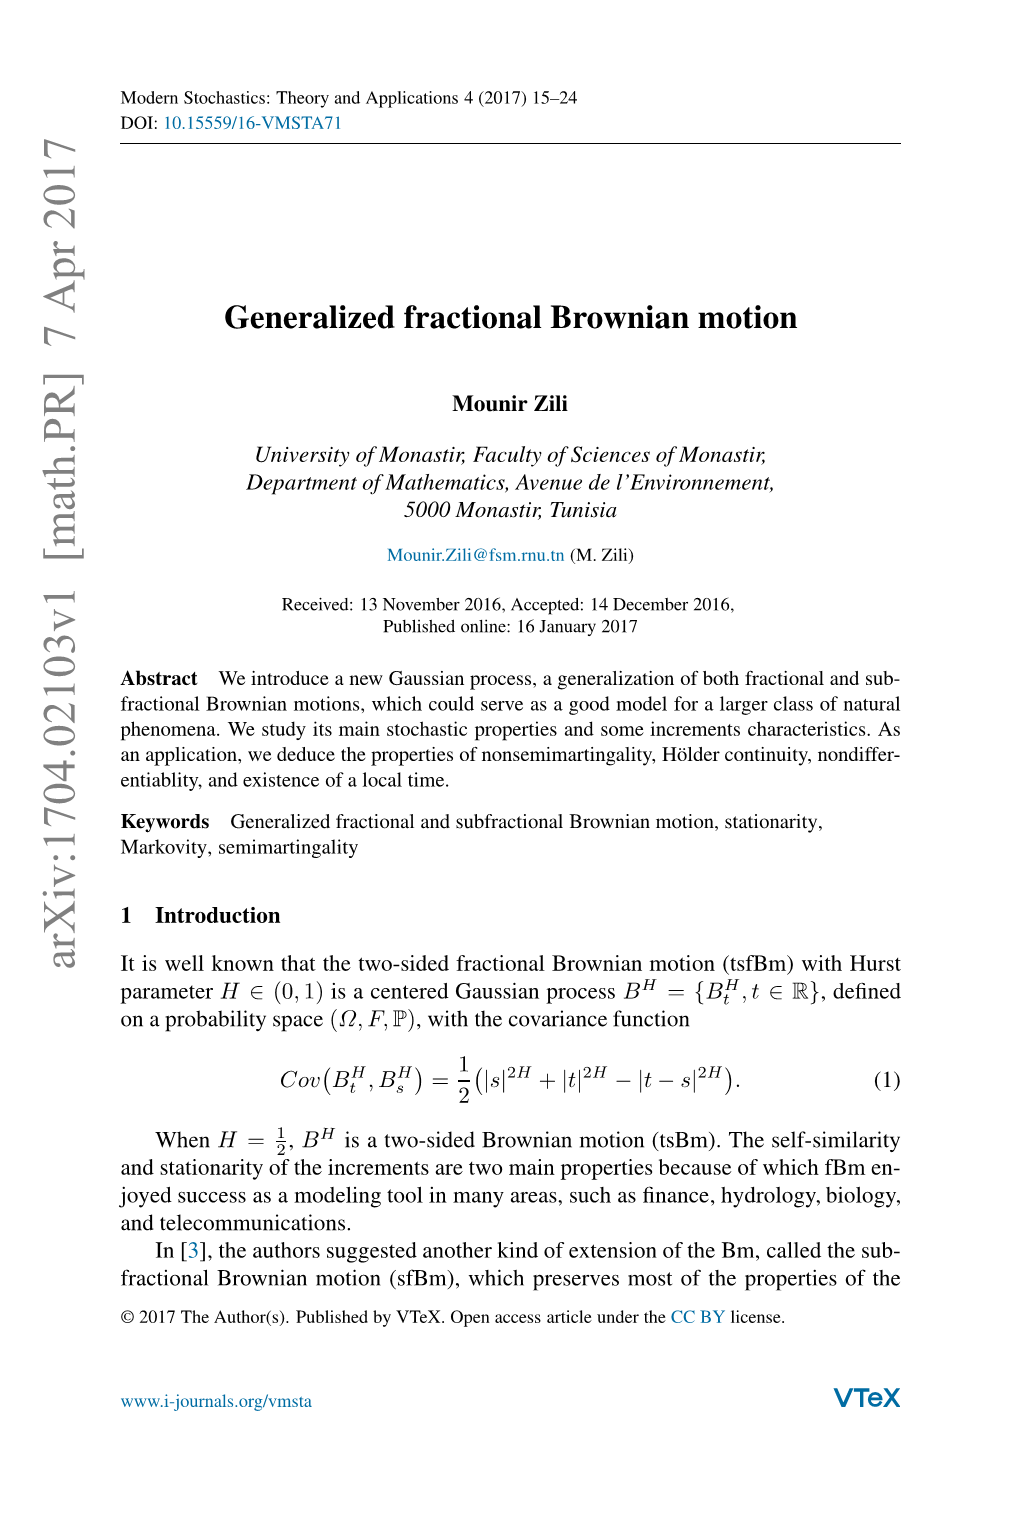 Generalized Fractional Brownian Motion